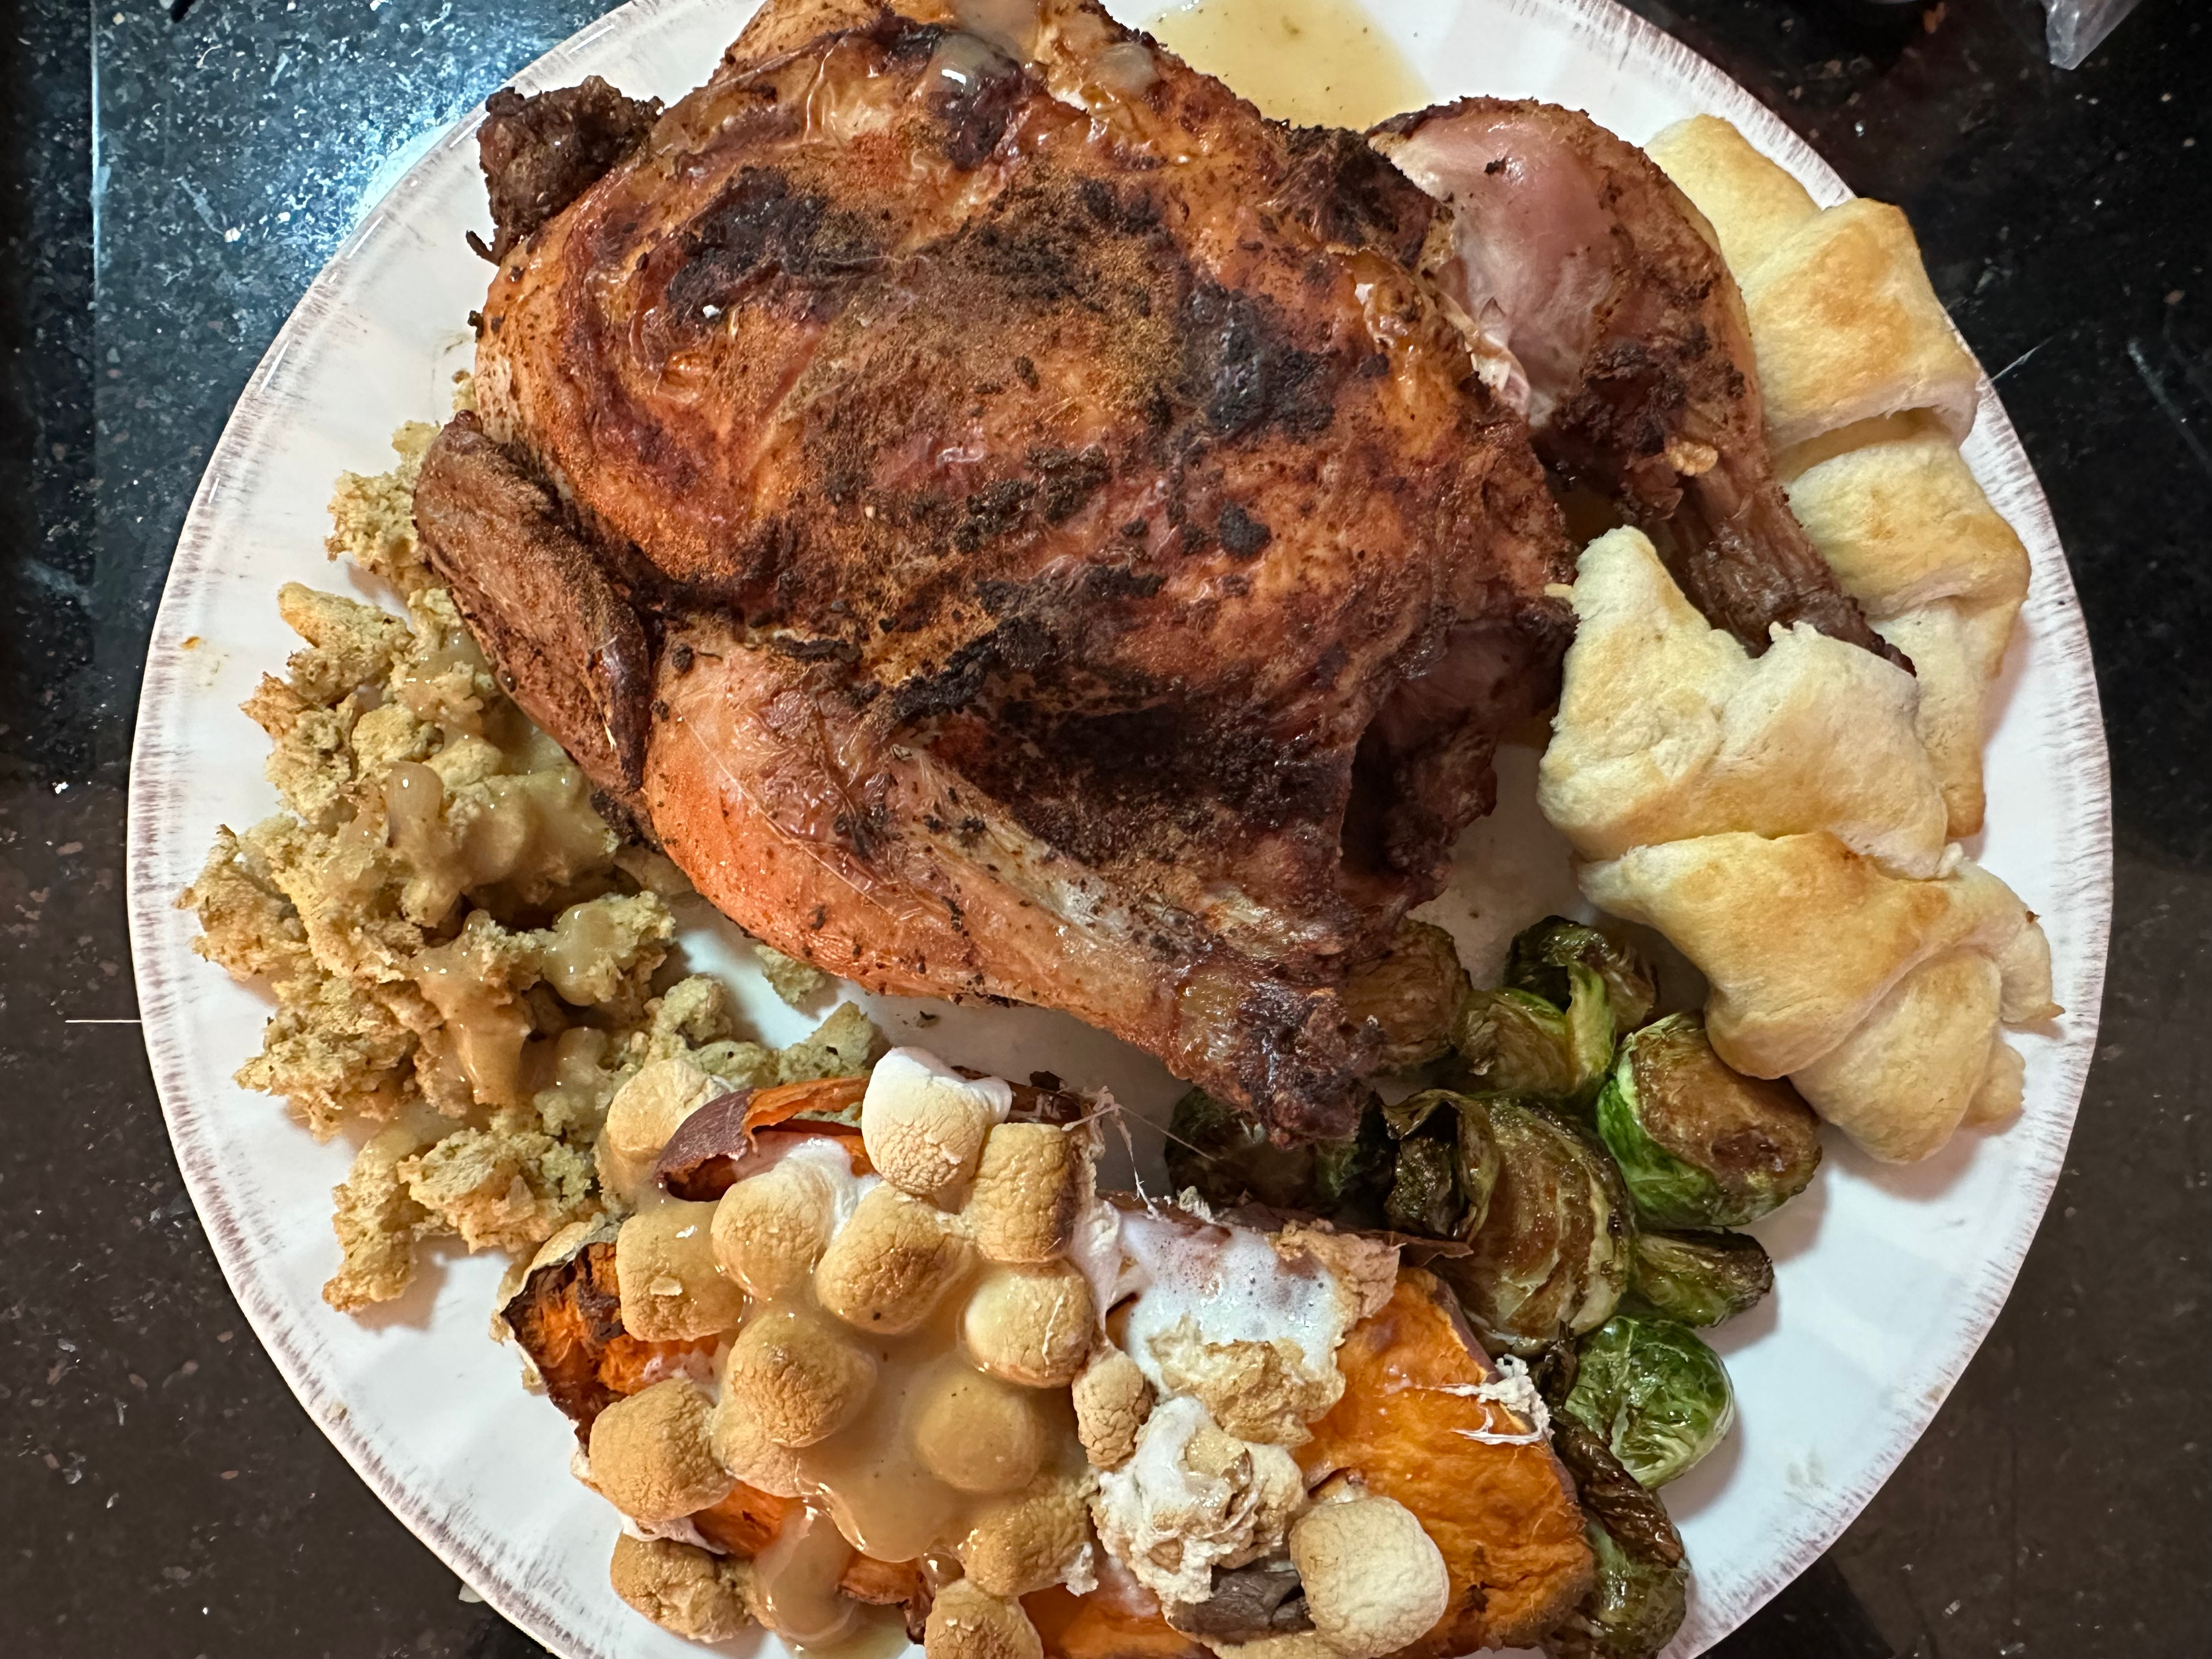 air fryer, oven, thanksgiving, thanksgiving food, turkey, i made an air fryer thanksgiving dinner so you don’t have to